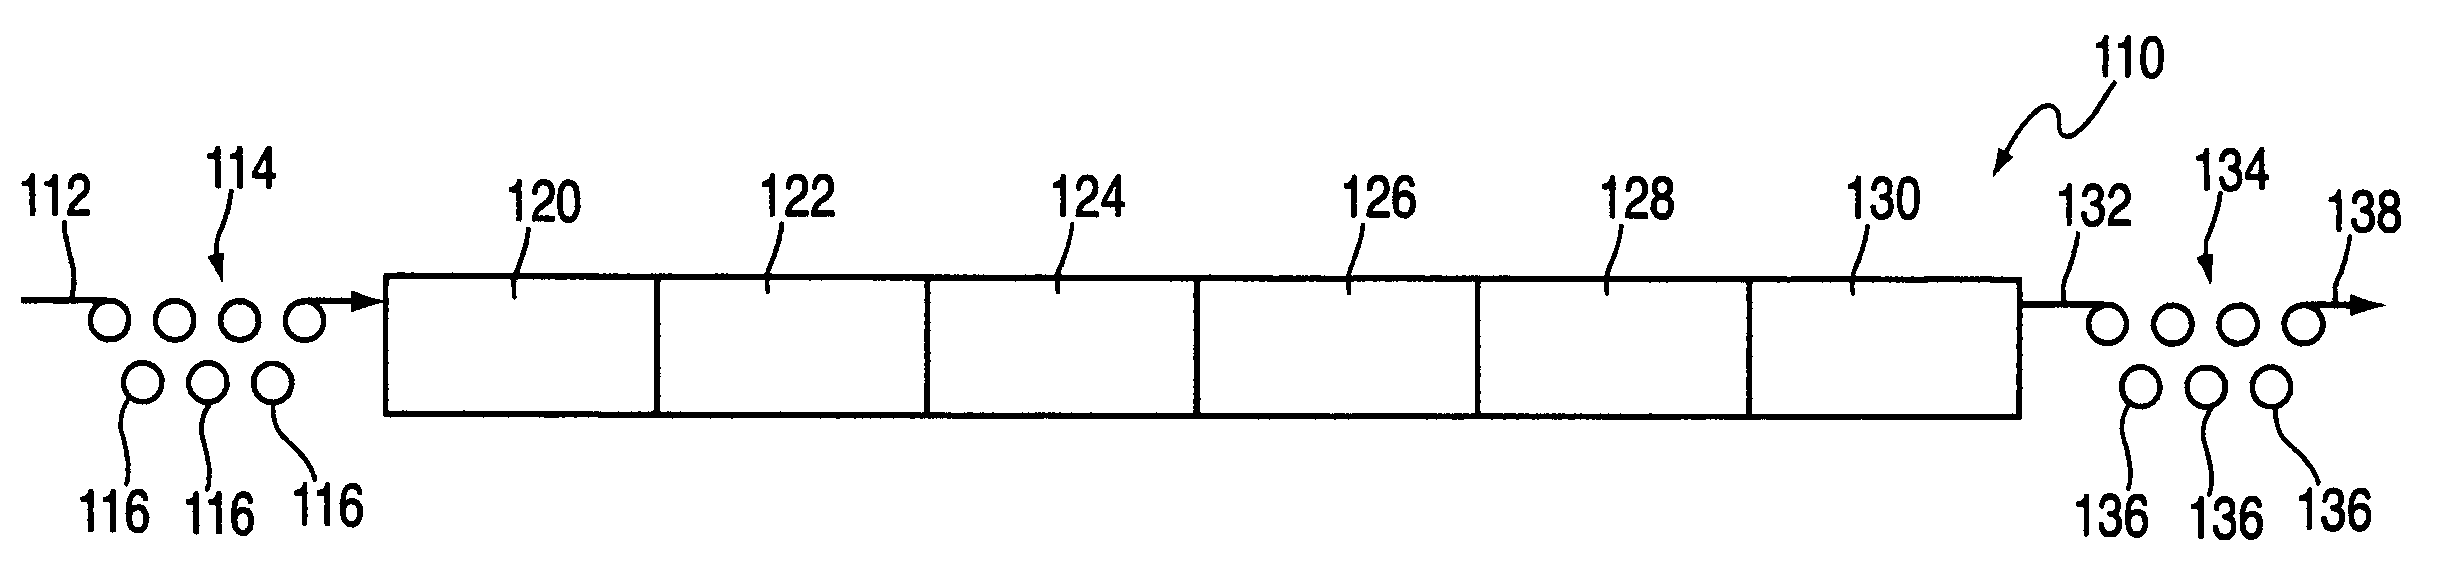 Heating apparatus and process for drawing polyolefin fibers